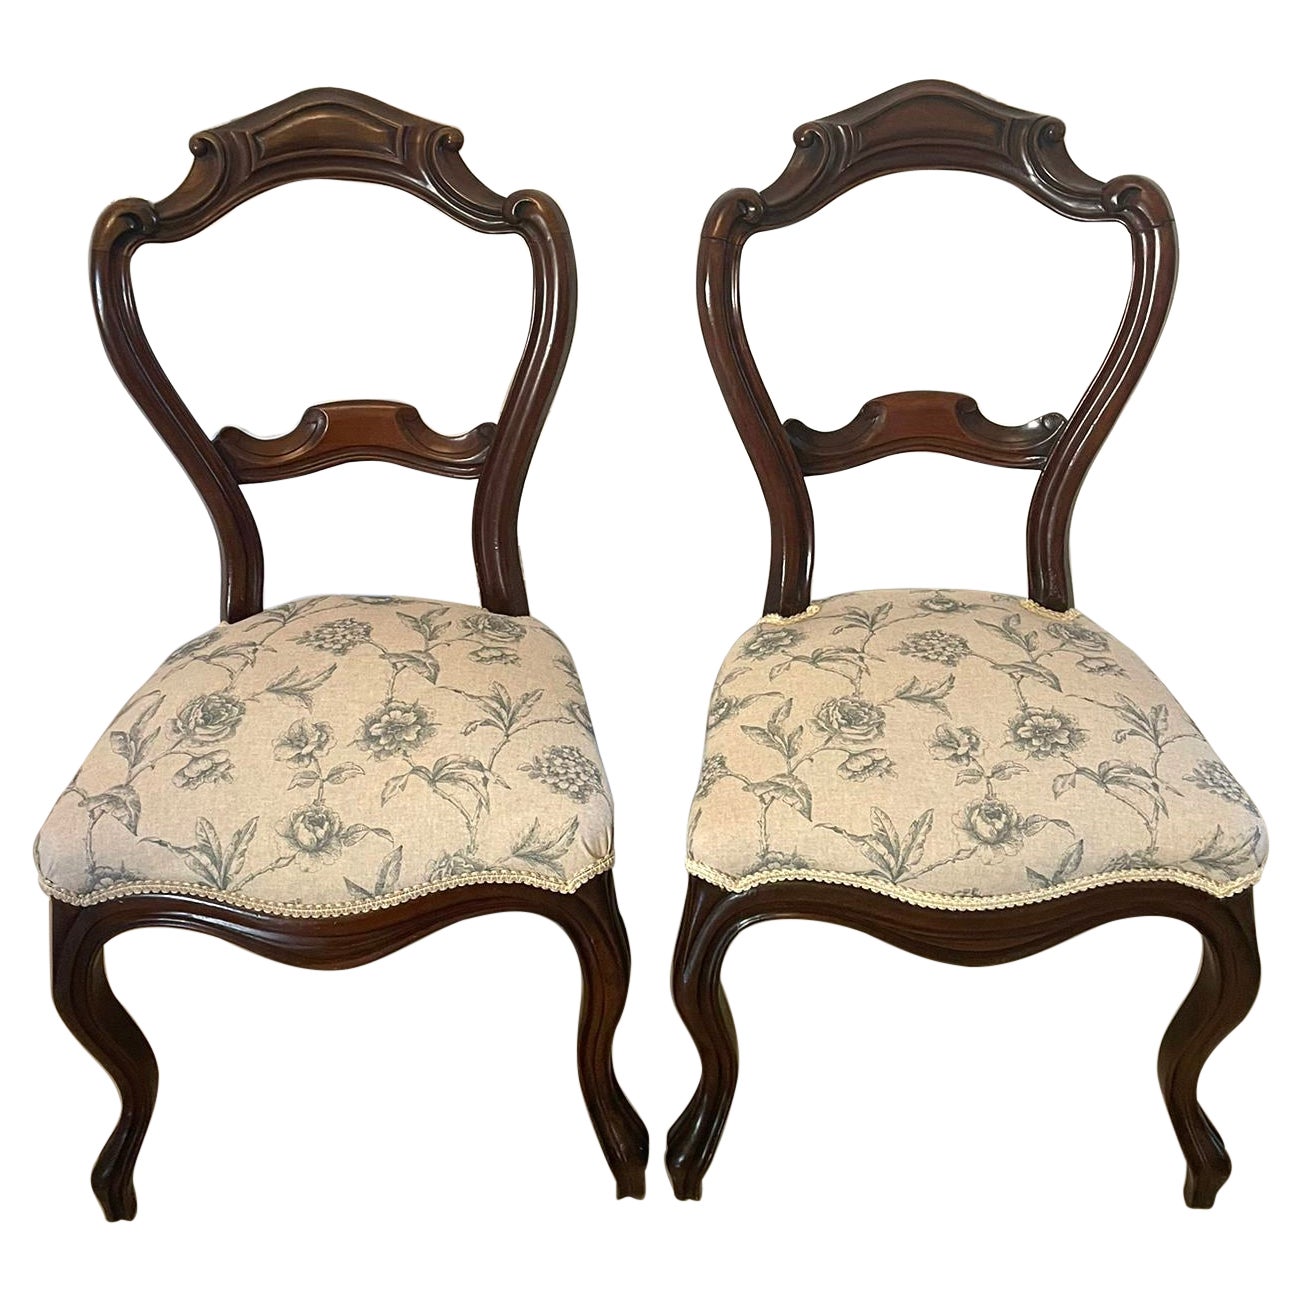  Pair of Antique Victorian Quality Walnut Side Chairs  For Sale